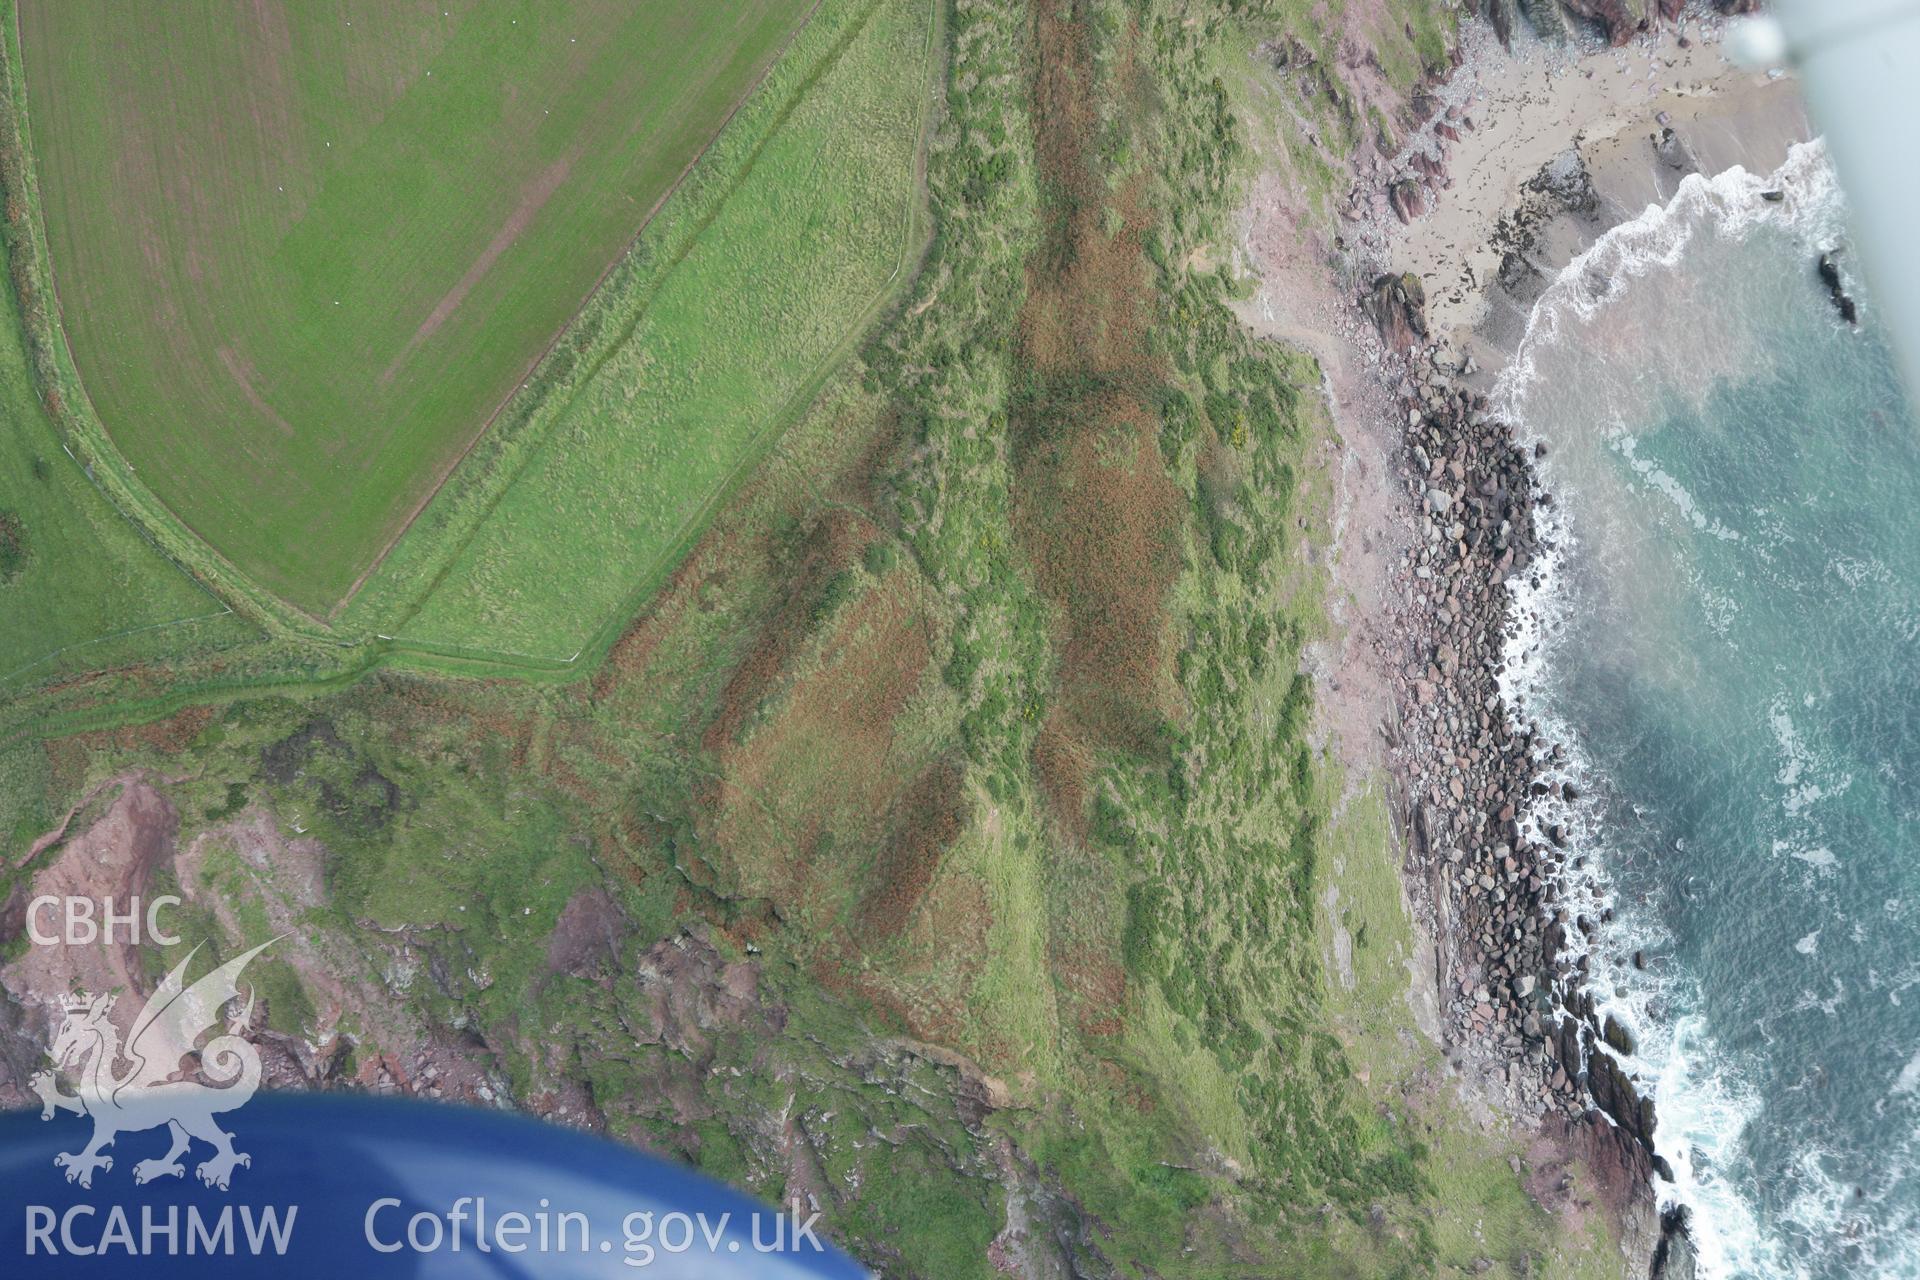 RCAHMW colour oblique aerial photograph of Great Castle Head Promontory Fort. Taken on 14 October 2009 by Toby Driver